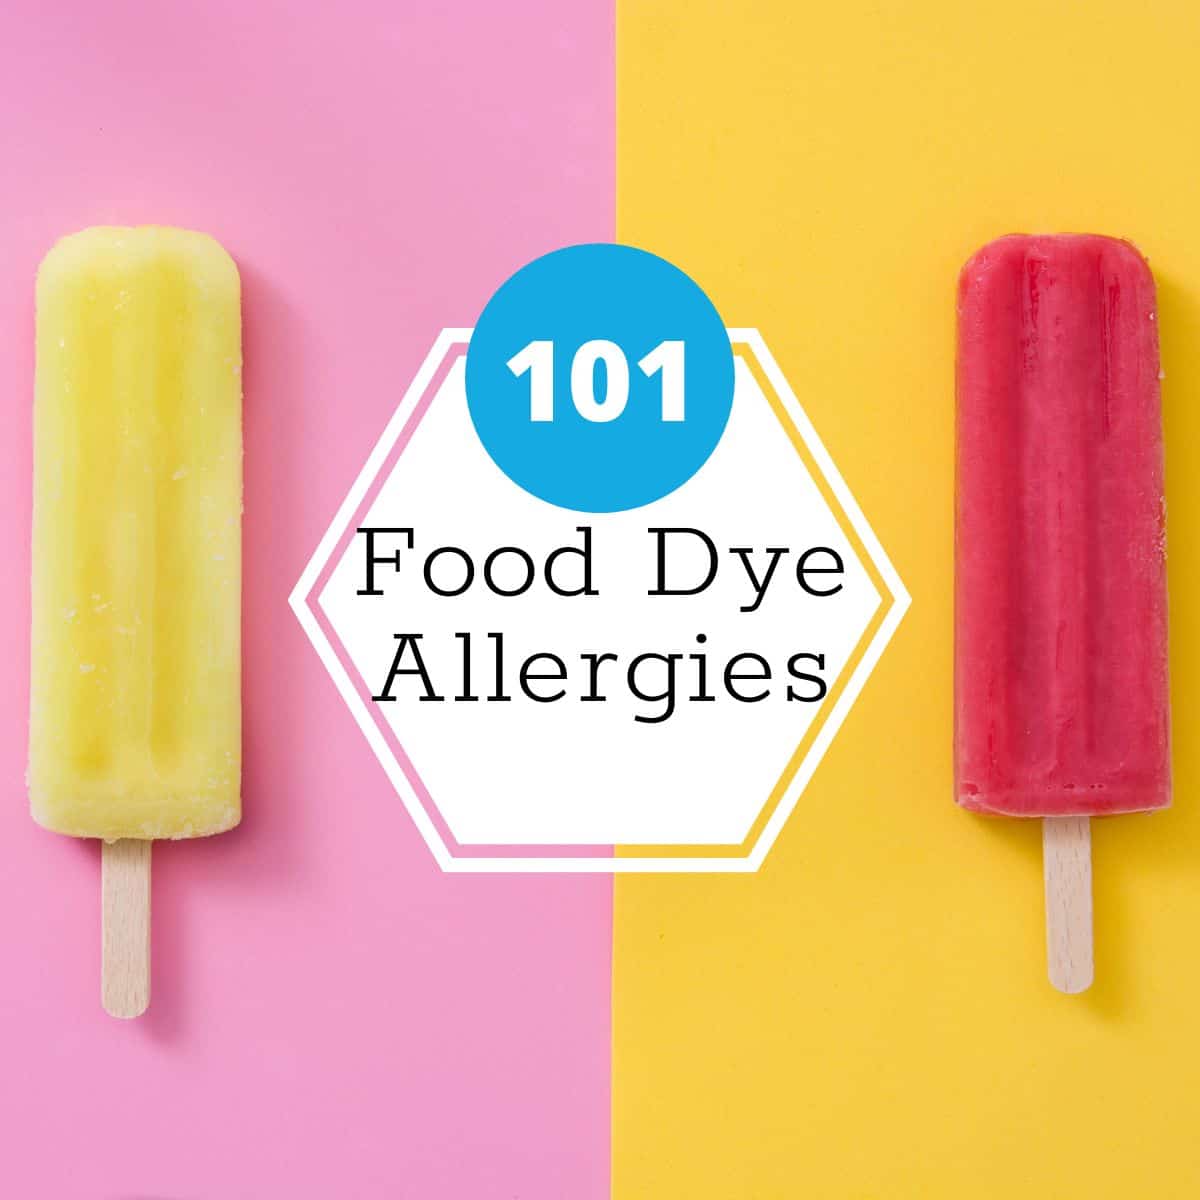 Two popsicles on a bright colored background. A white hexagon has text that reads, "food dye allergies 101".